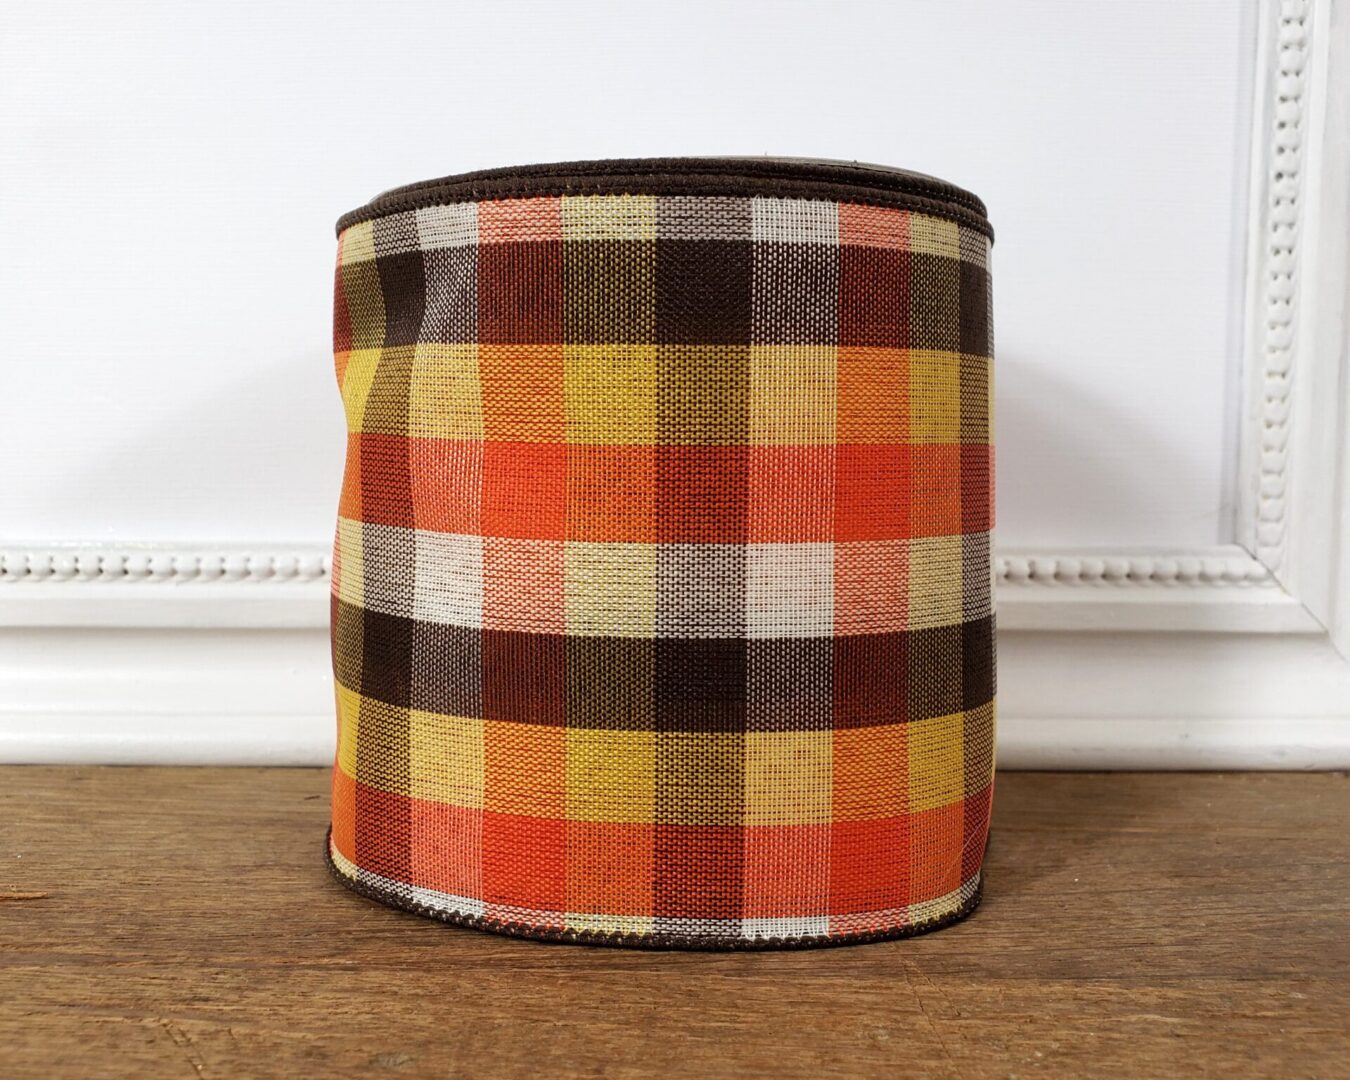 A brown, orange and yellow plaid container sitting on top of a wooden floor.